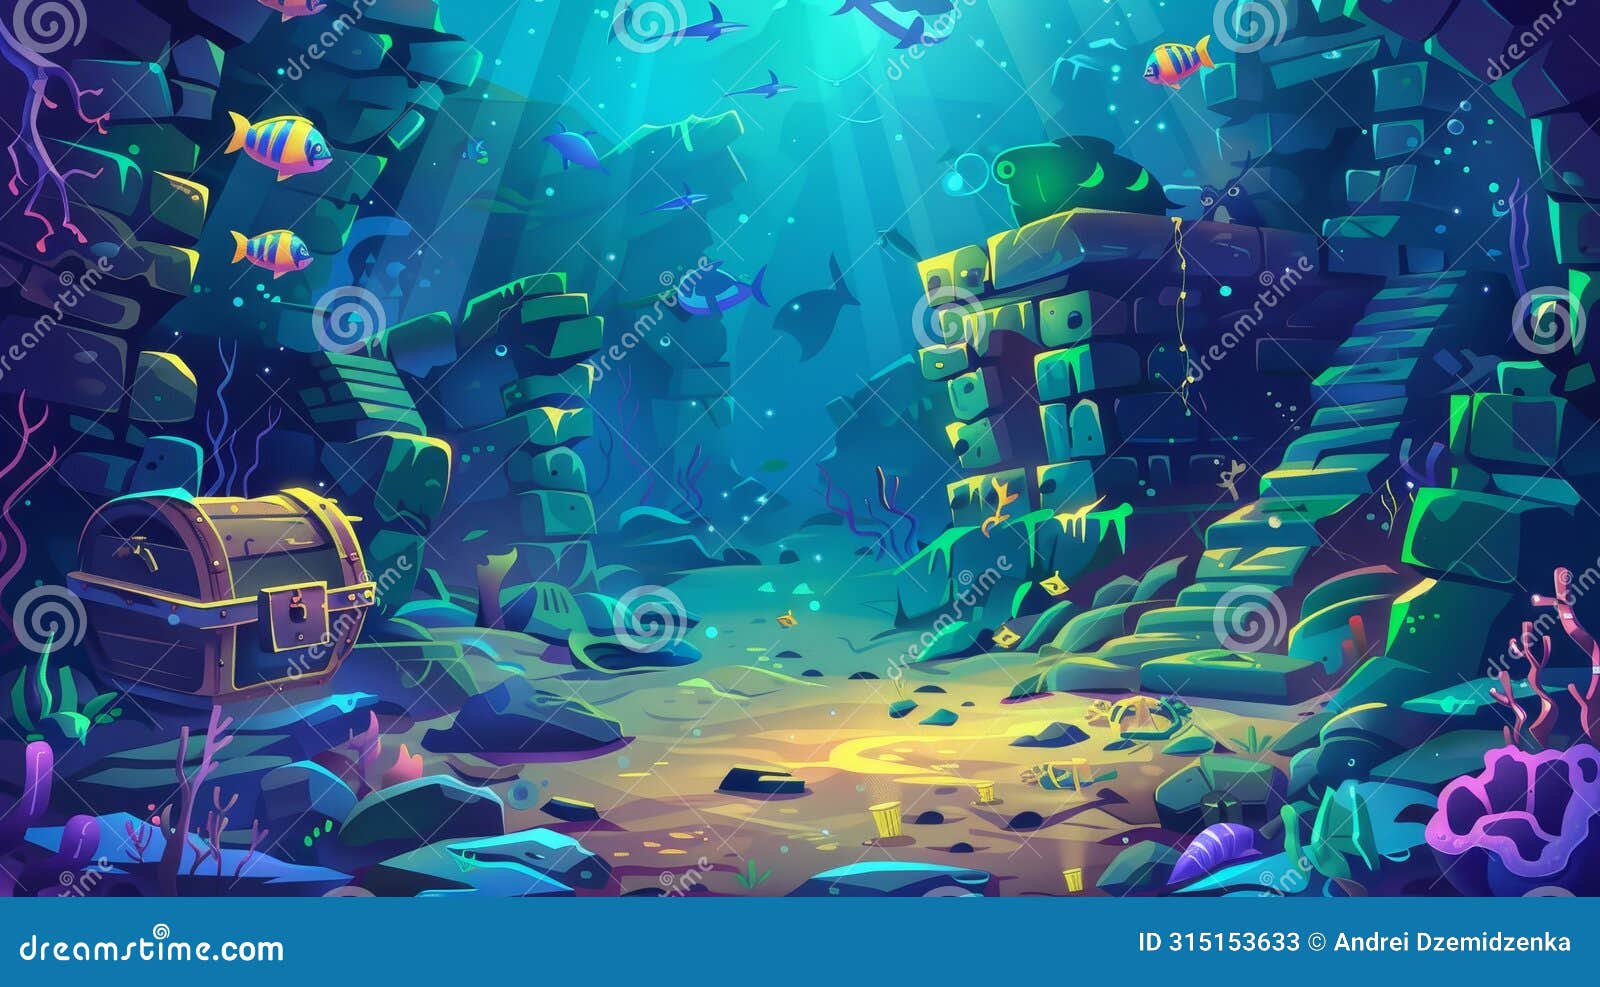 a underwater background with fish, sunken ship, and wrecked ship. this is a modern cartoon of a deep seafloor with